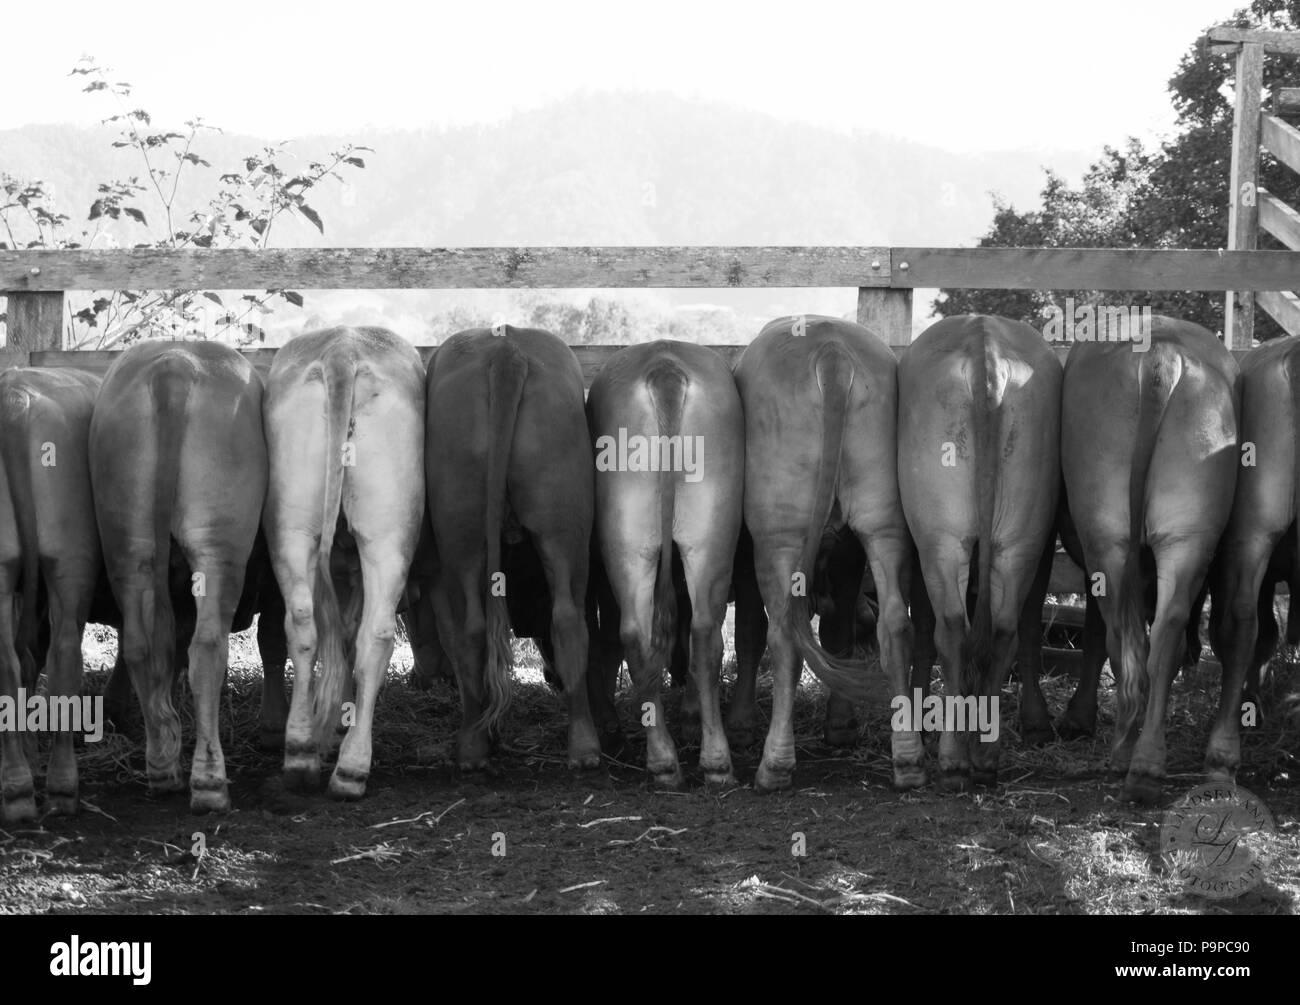 Cows lining up for hay Stock Photo - Alamy